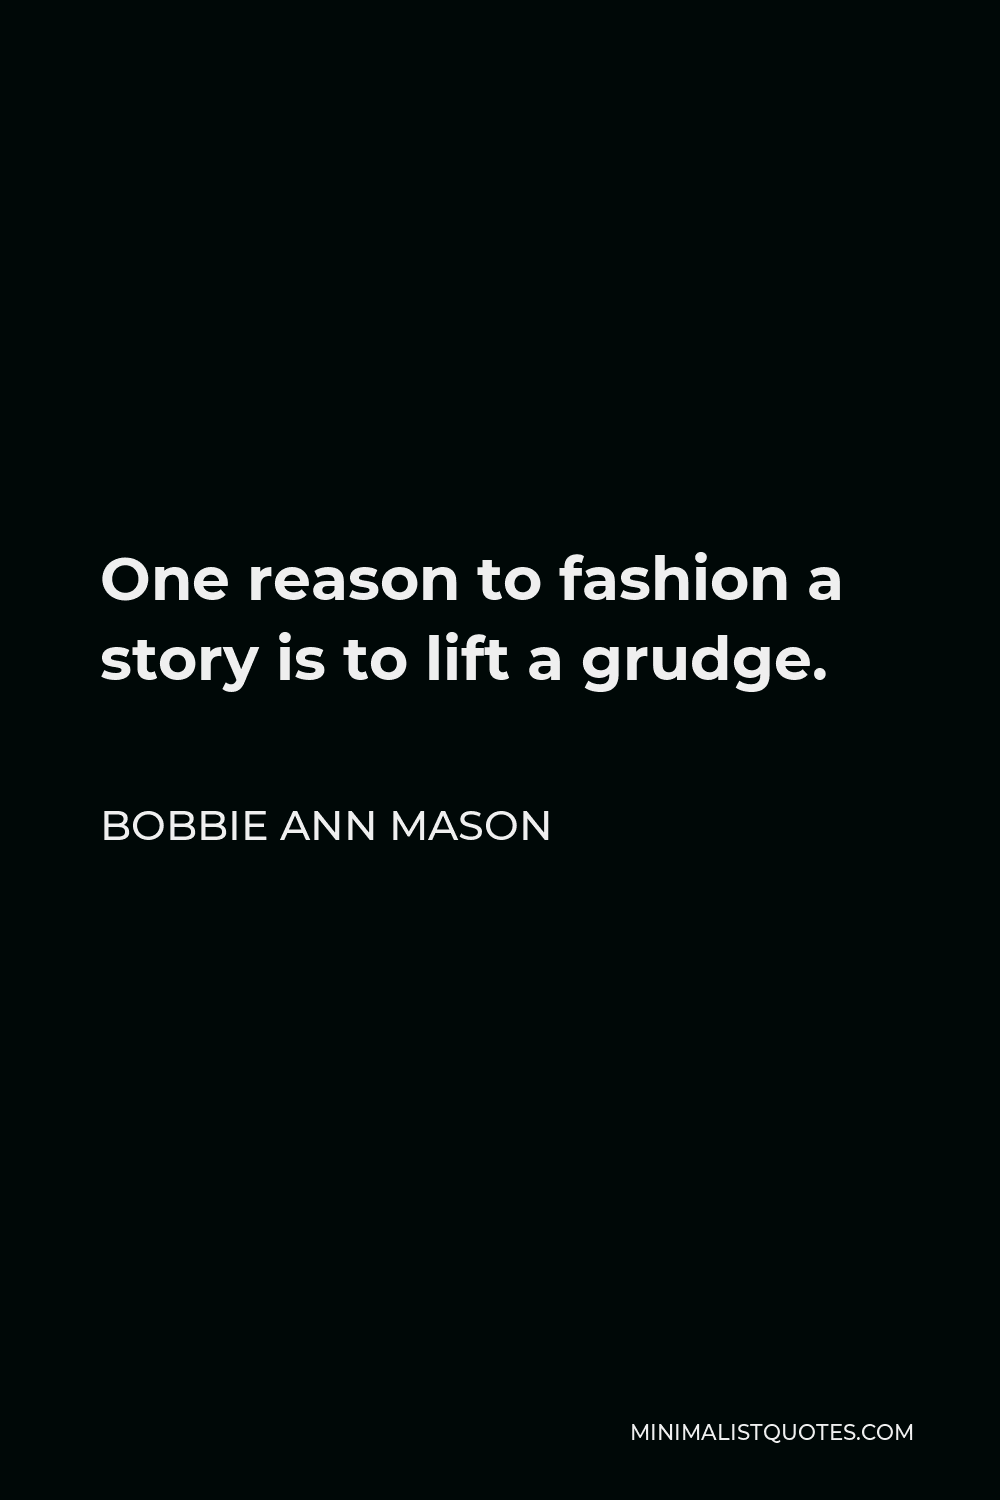 Bobbie Ann Mason Quote - One reason to fashion a story is to lift a grudge.